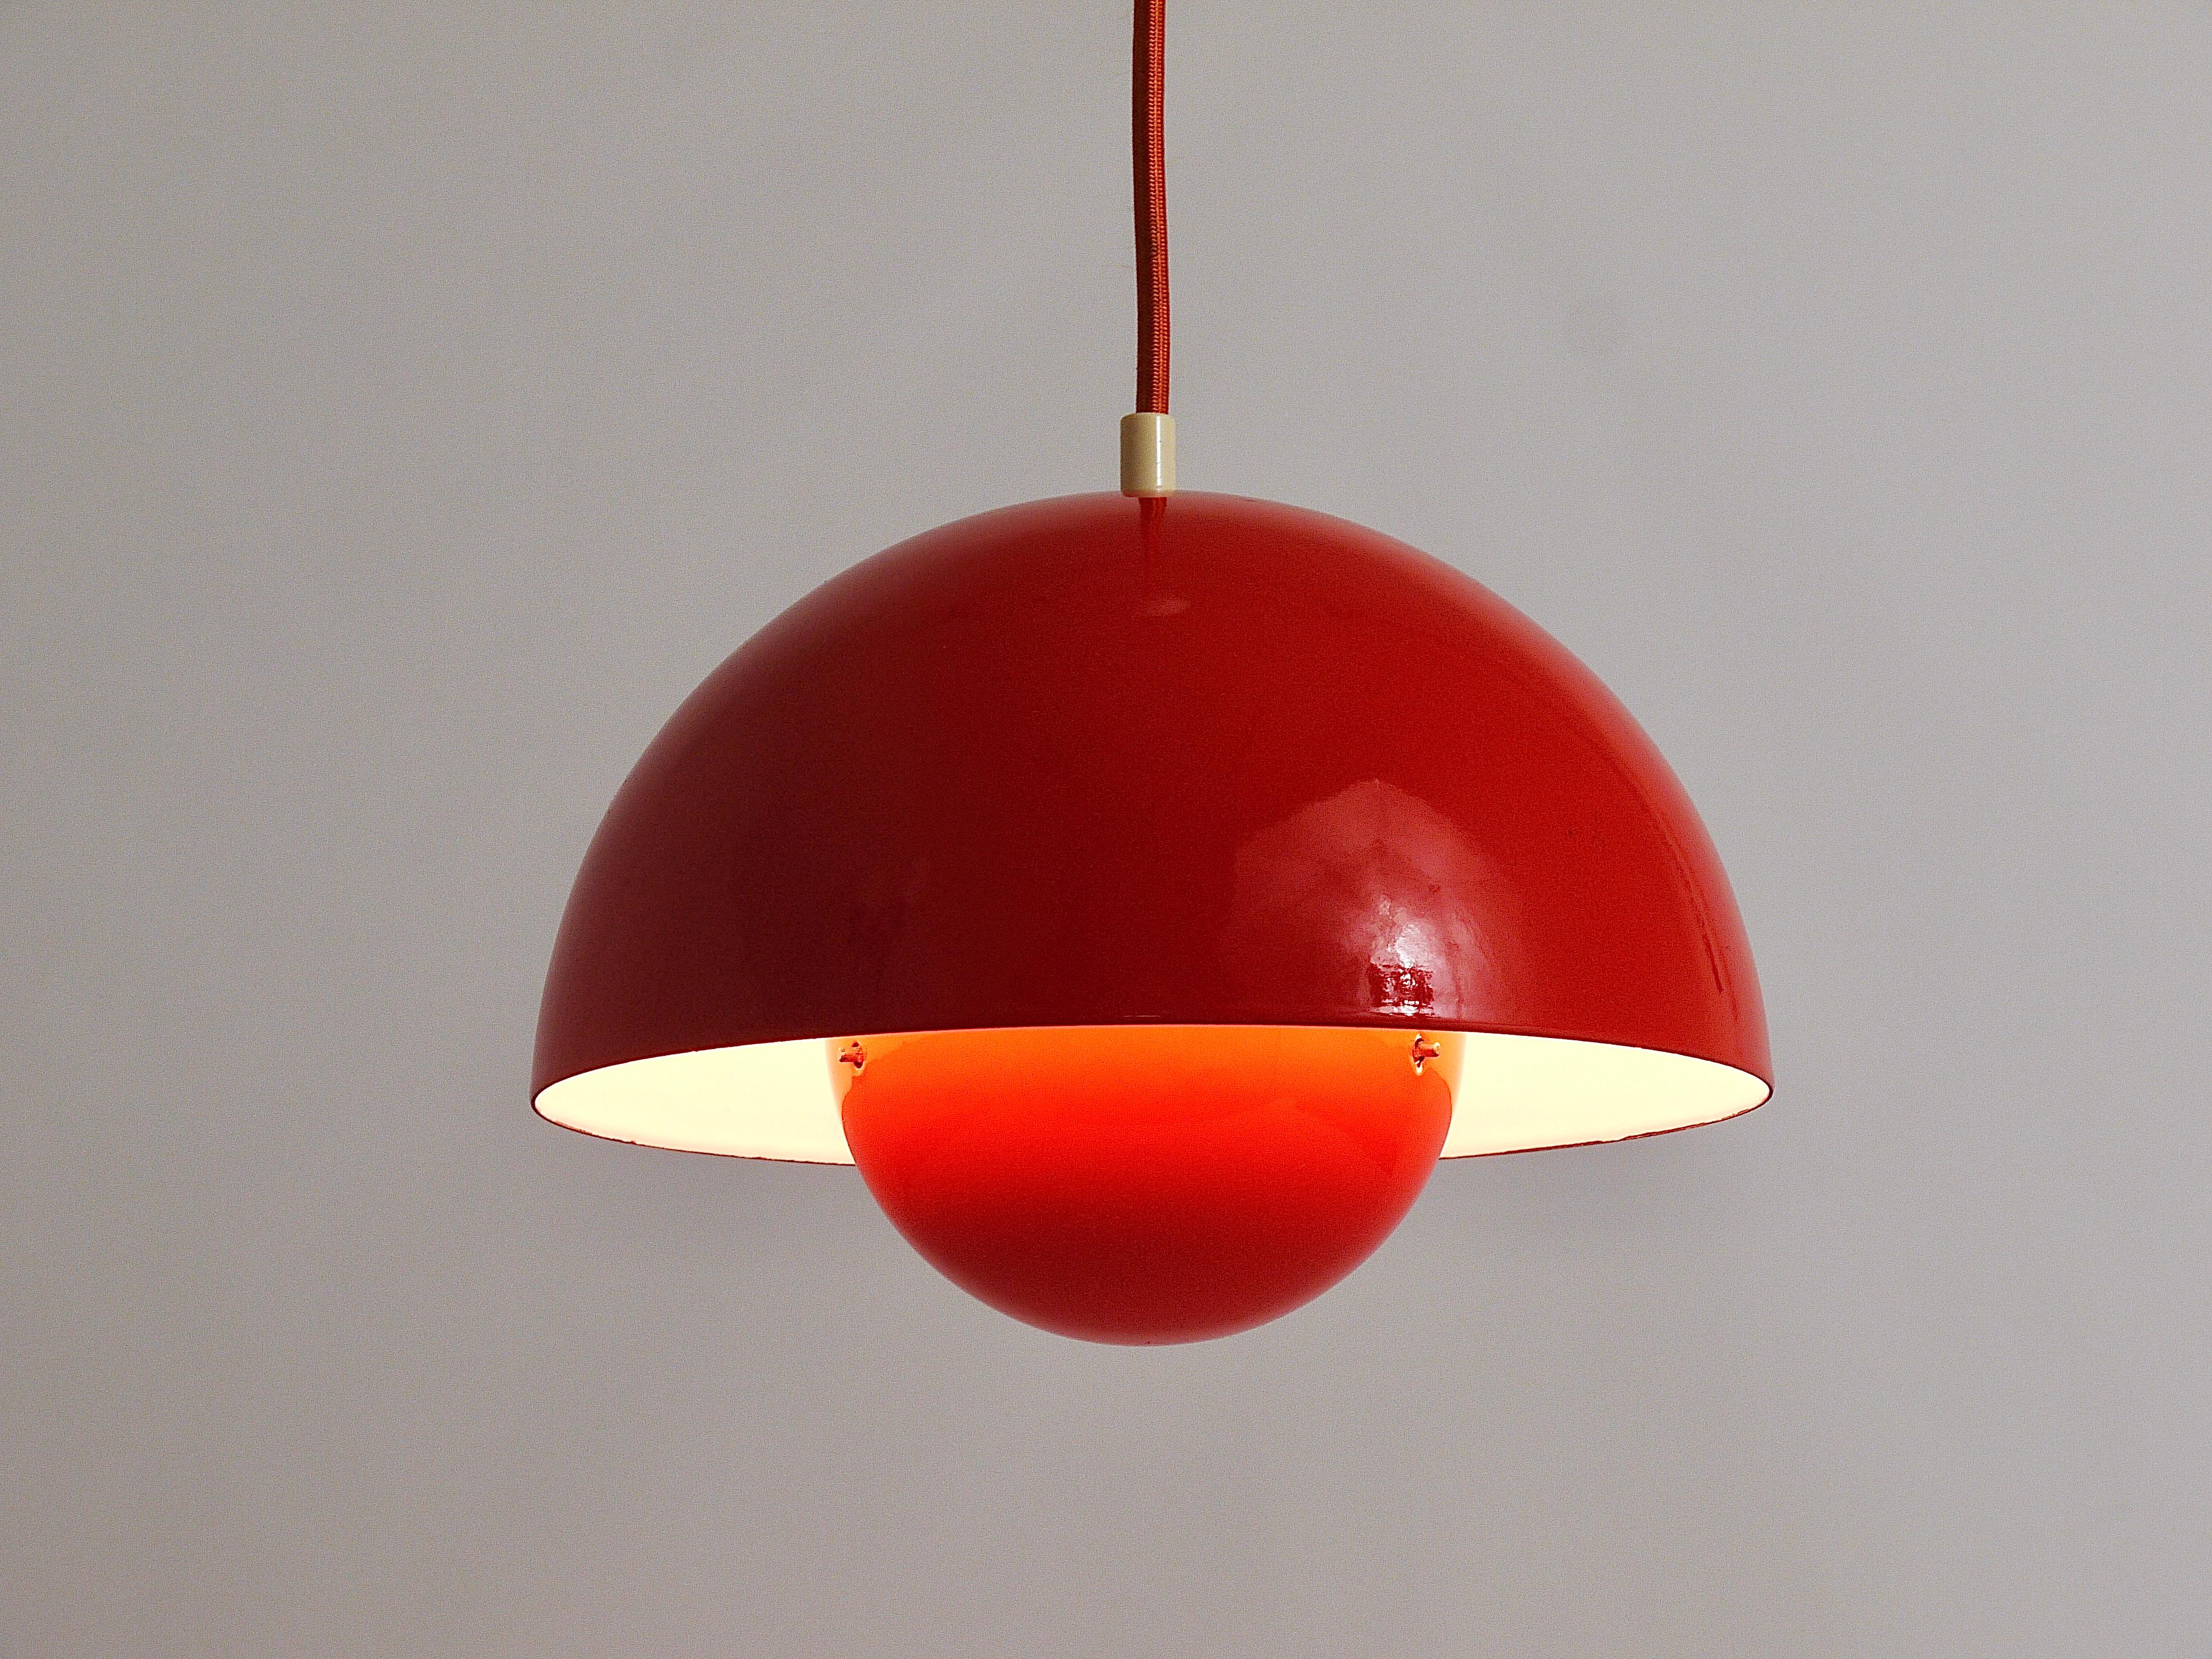 An iconic orange flowerpot pendant light, designed in 1969 by Verner Panton for Louis Pulsen, Denmark. A simple but beautiful ceiling light, consisting of two enameled hemispherical lampshades facing each other. The lower lampshade has a red